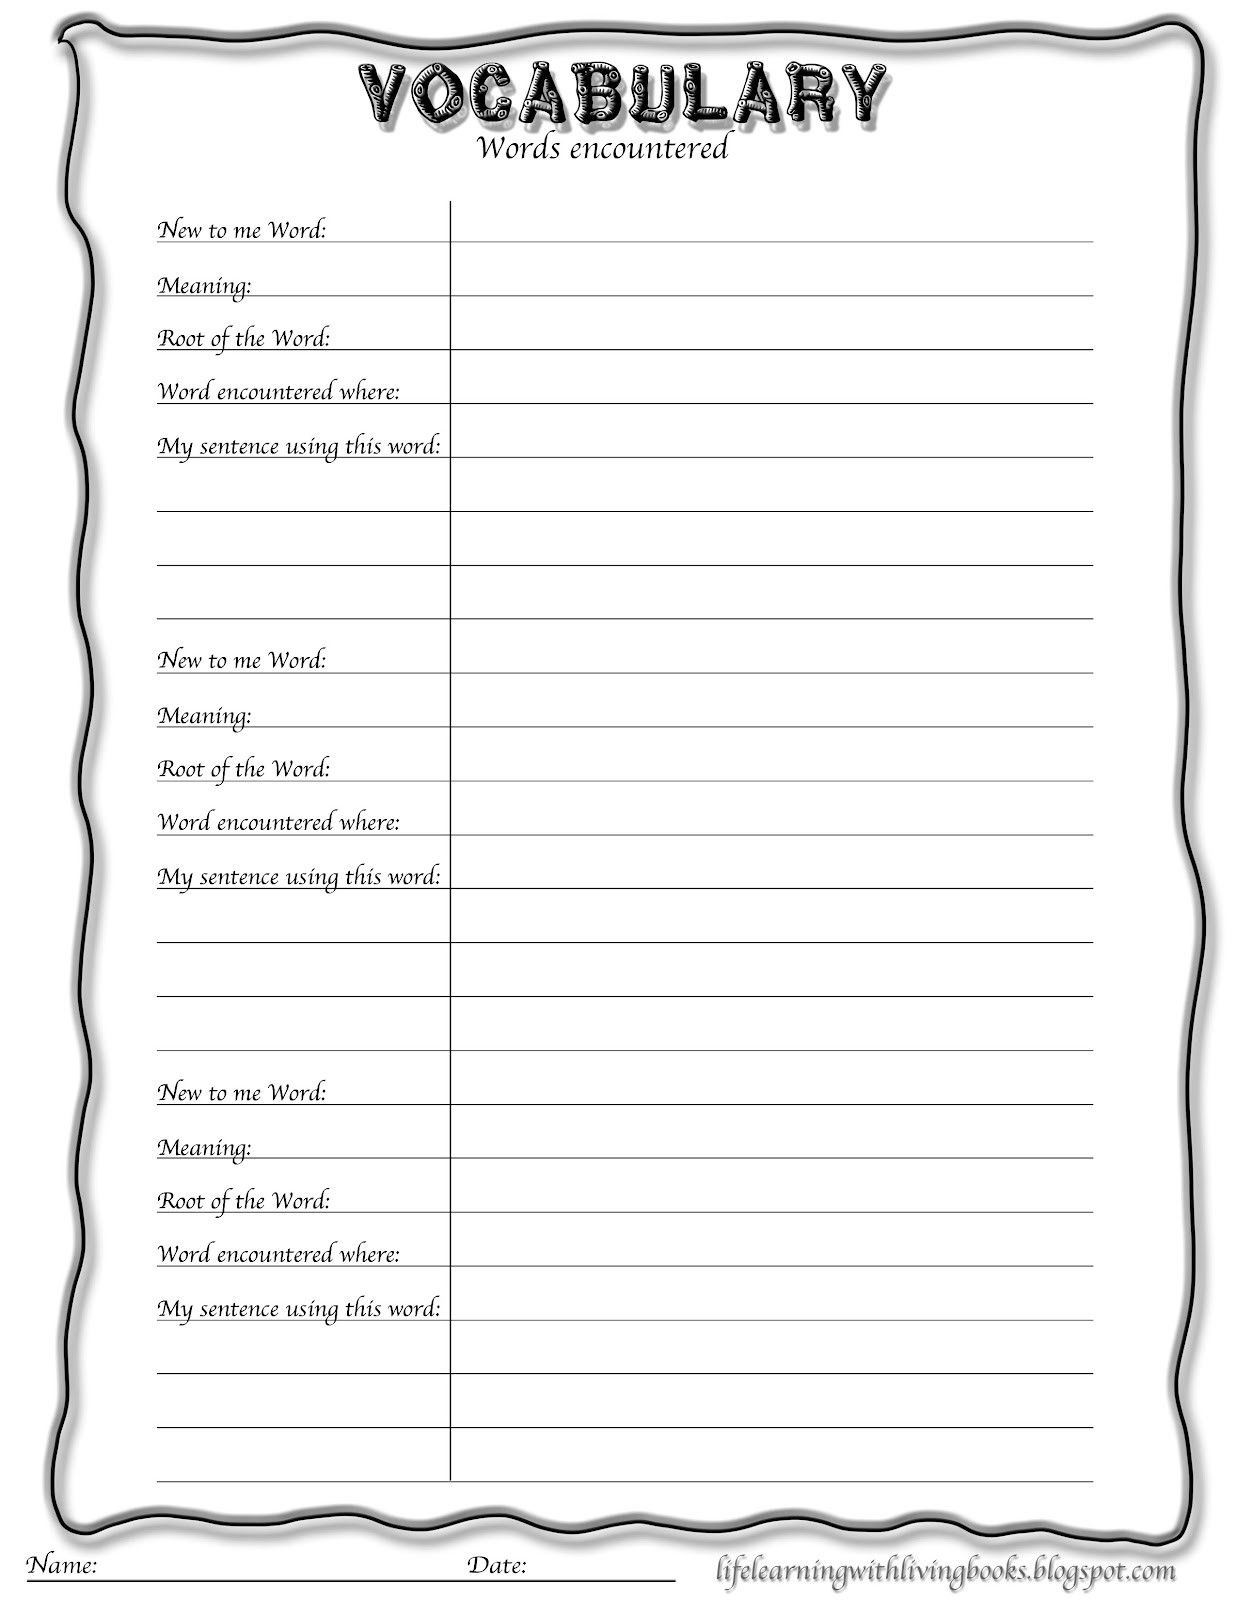 12 Best Images Of New Vocabulary Word Worksheet 2nd Grade Compound Words Worksheets Blank